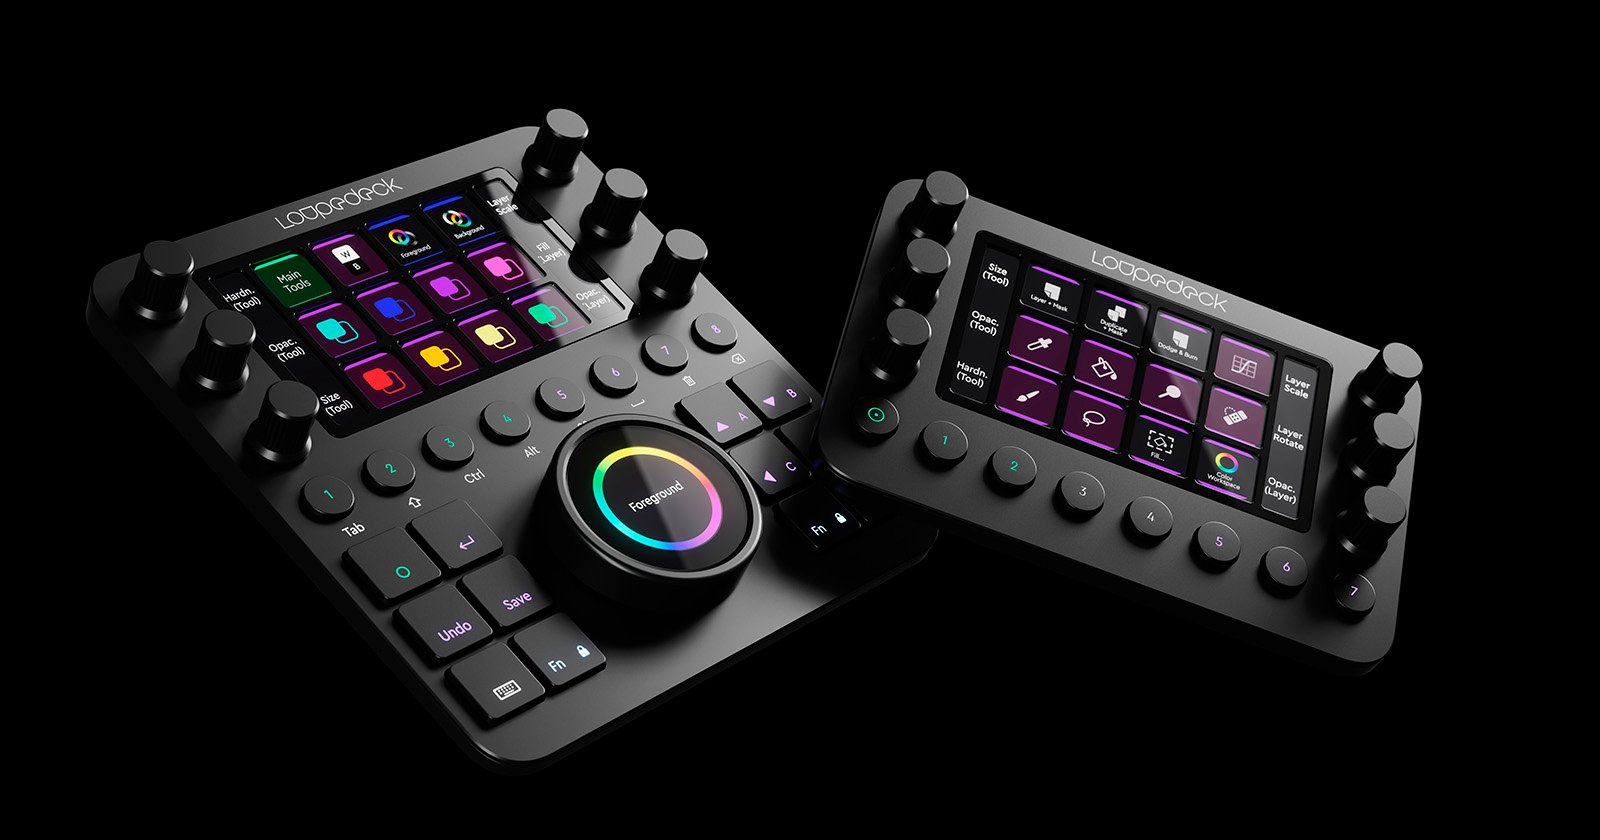 Loupedeck Creative Tool - Professional Custom Editing Console for Photo,  Video, Music and Design